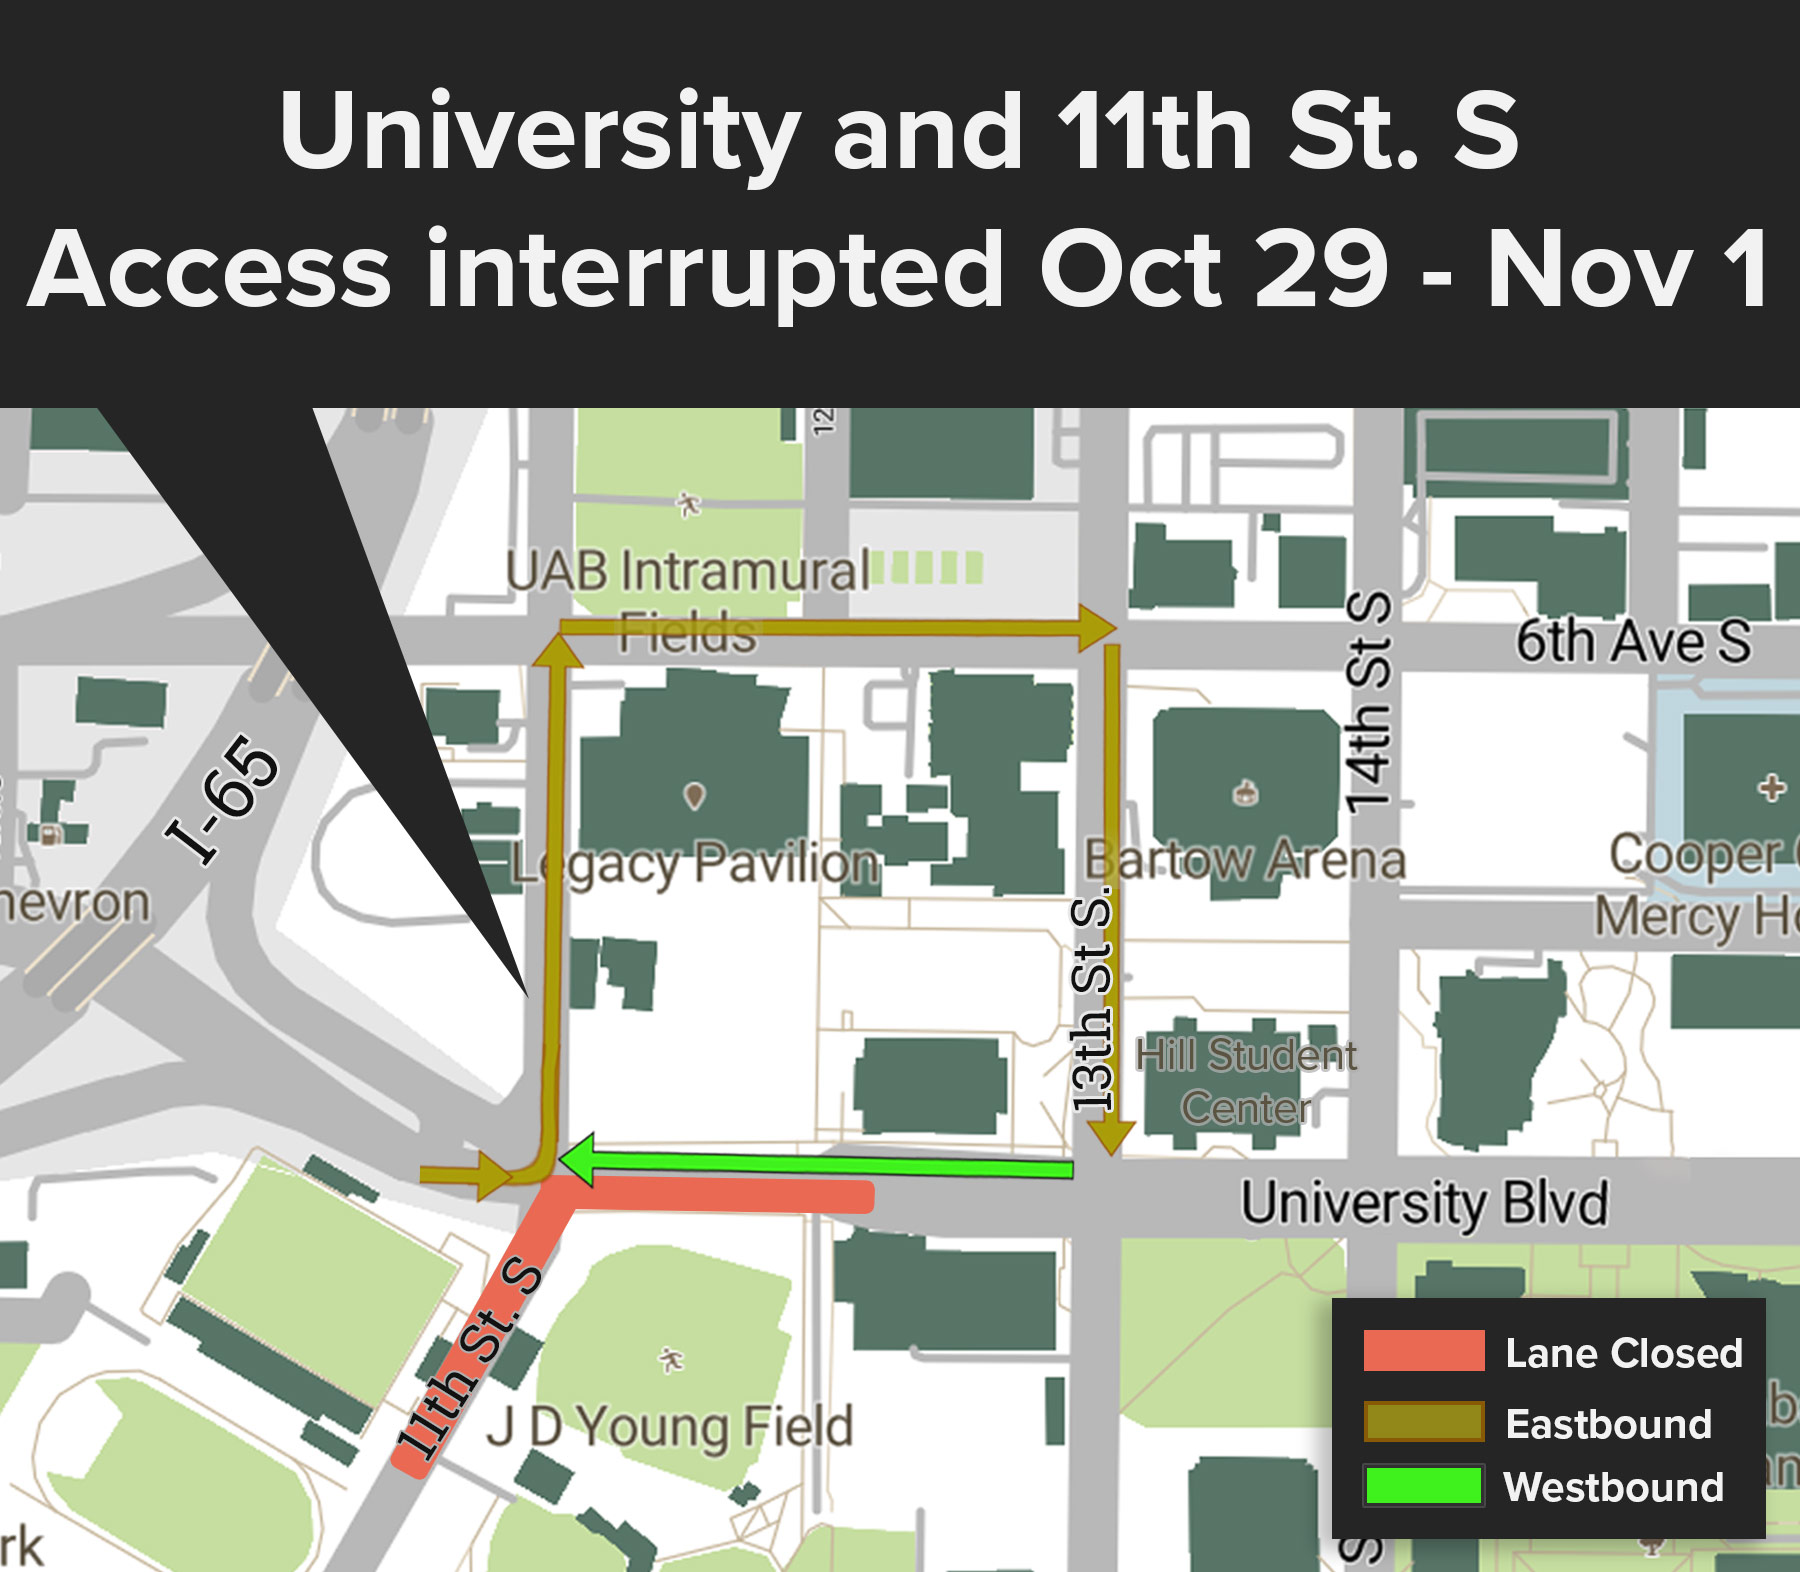 Campus map graphic showing the traffic interruptions and detour route